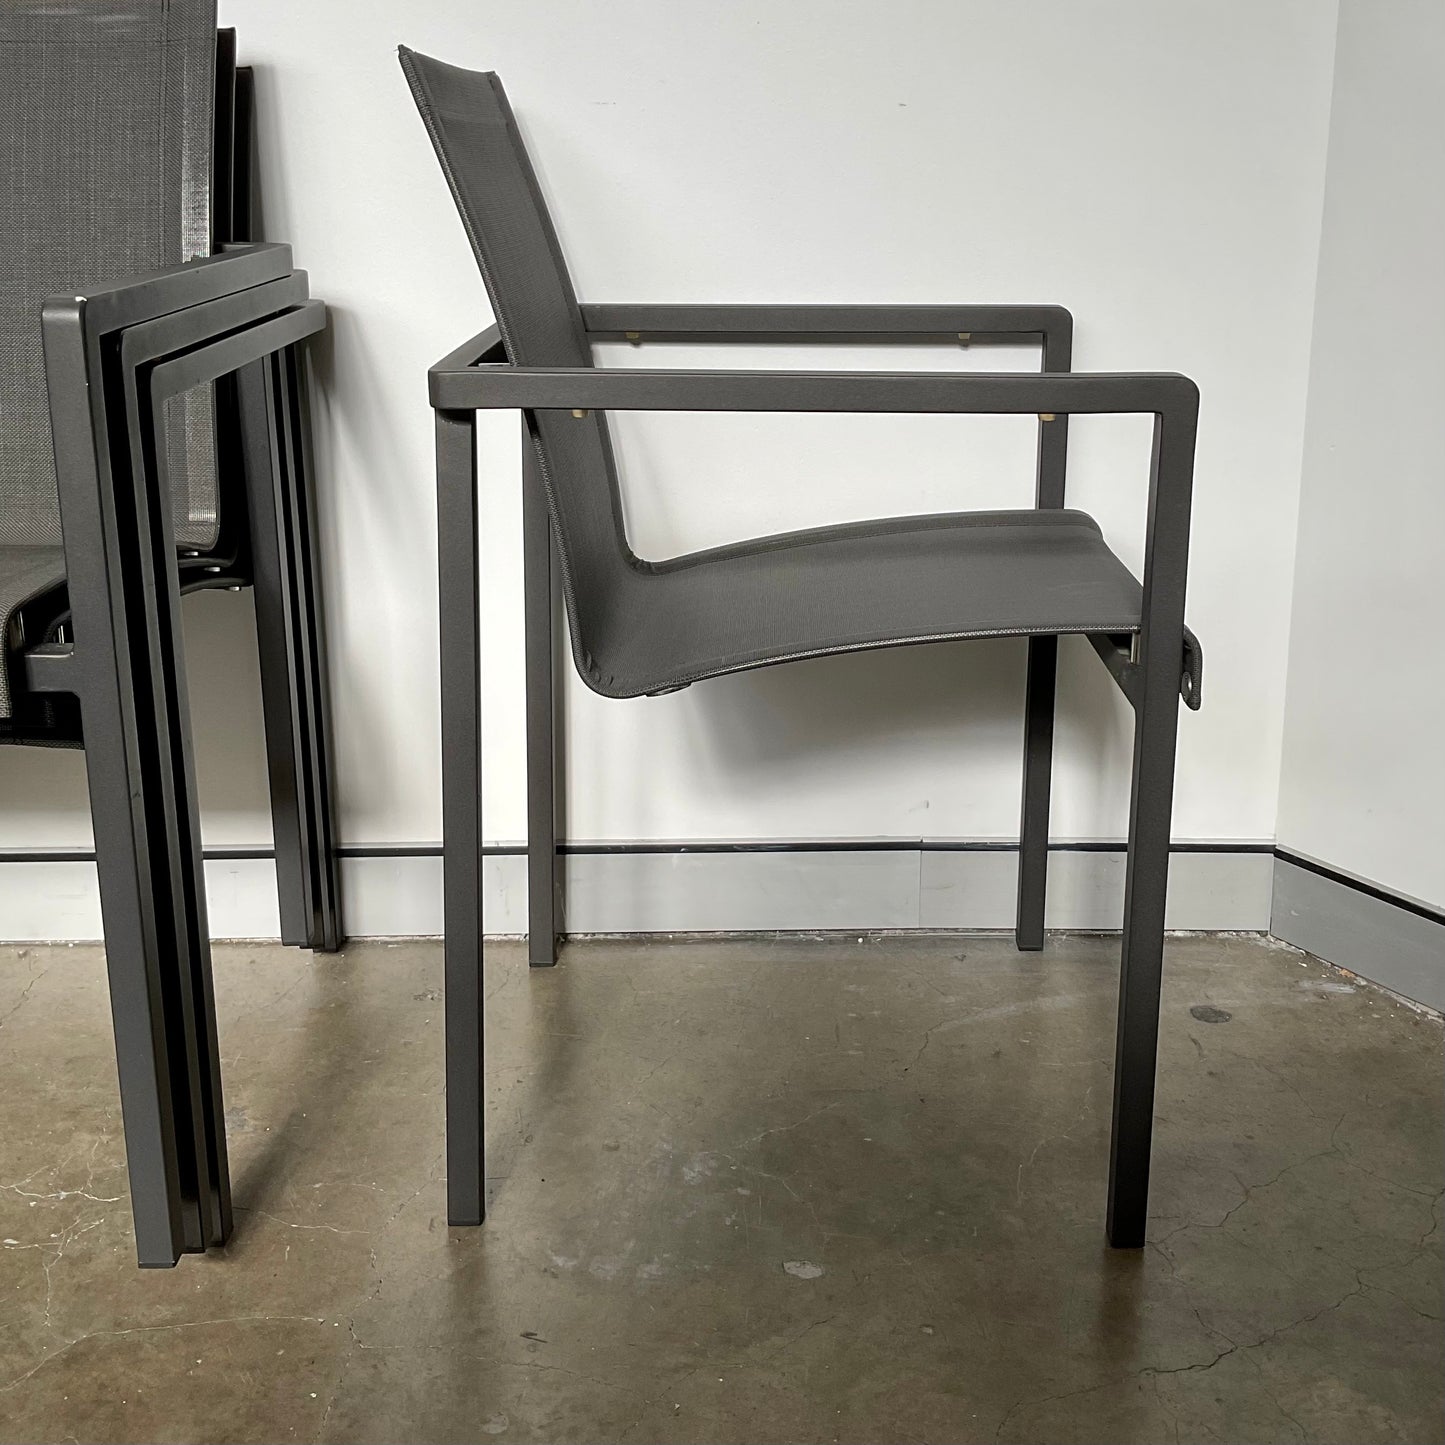 Set of FOUR Natal Alu Armchair by Wim Segers for Tribu through Cosh